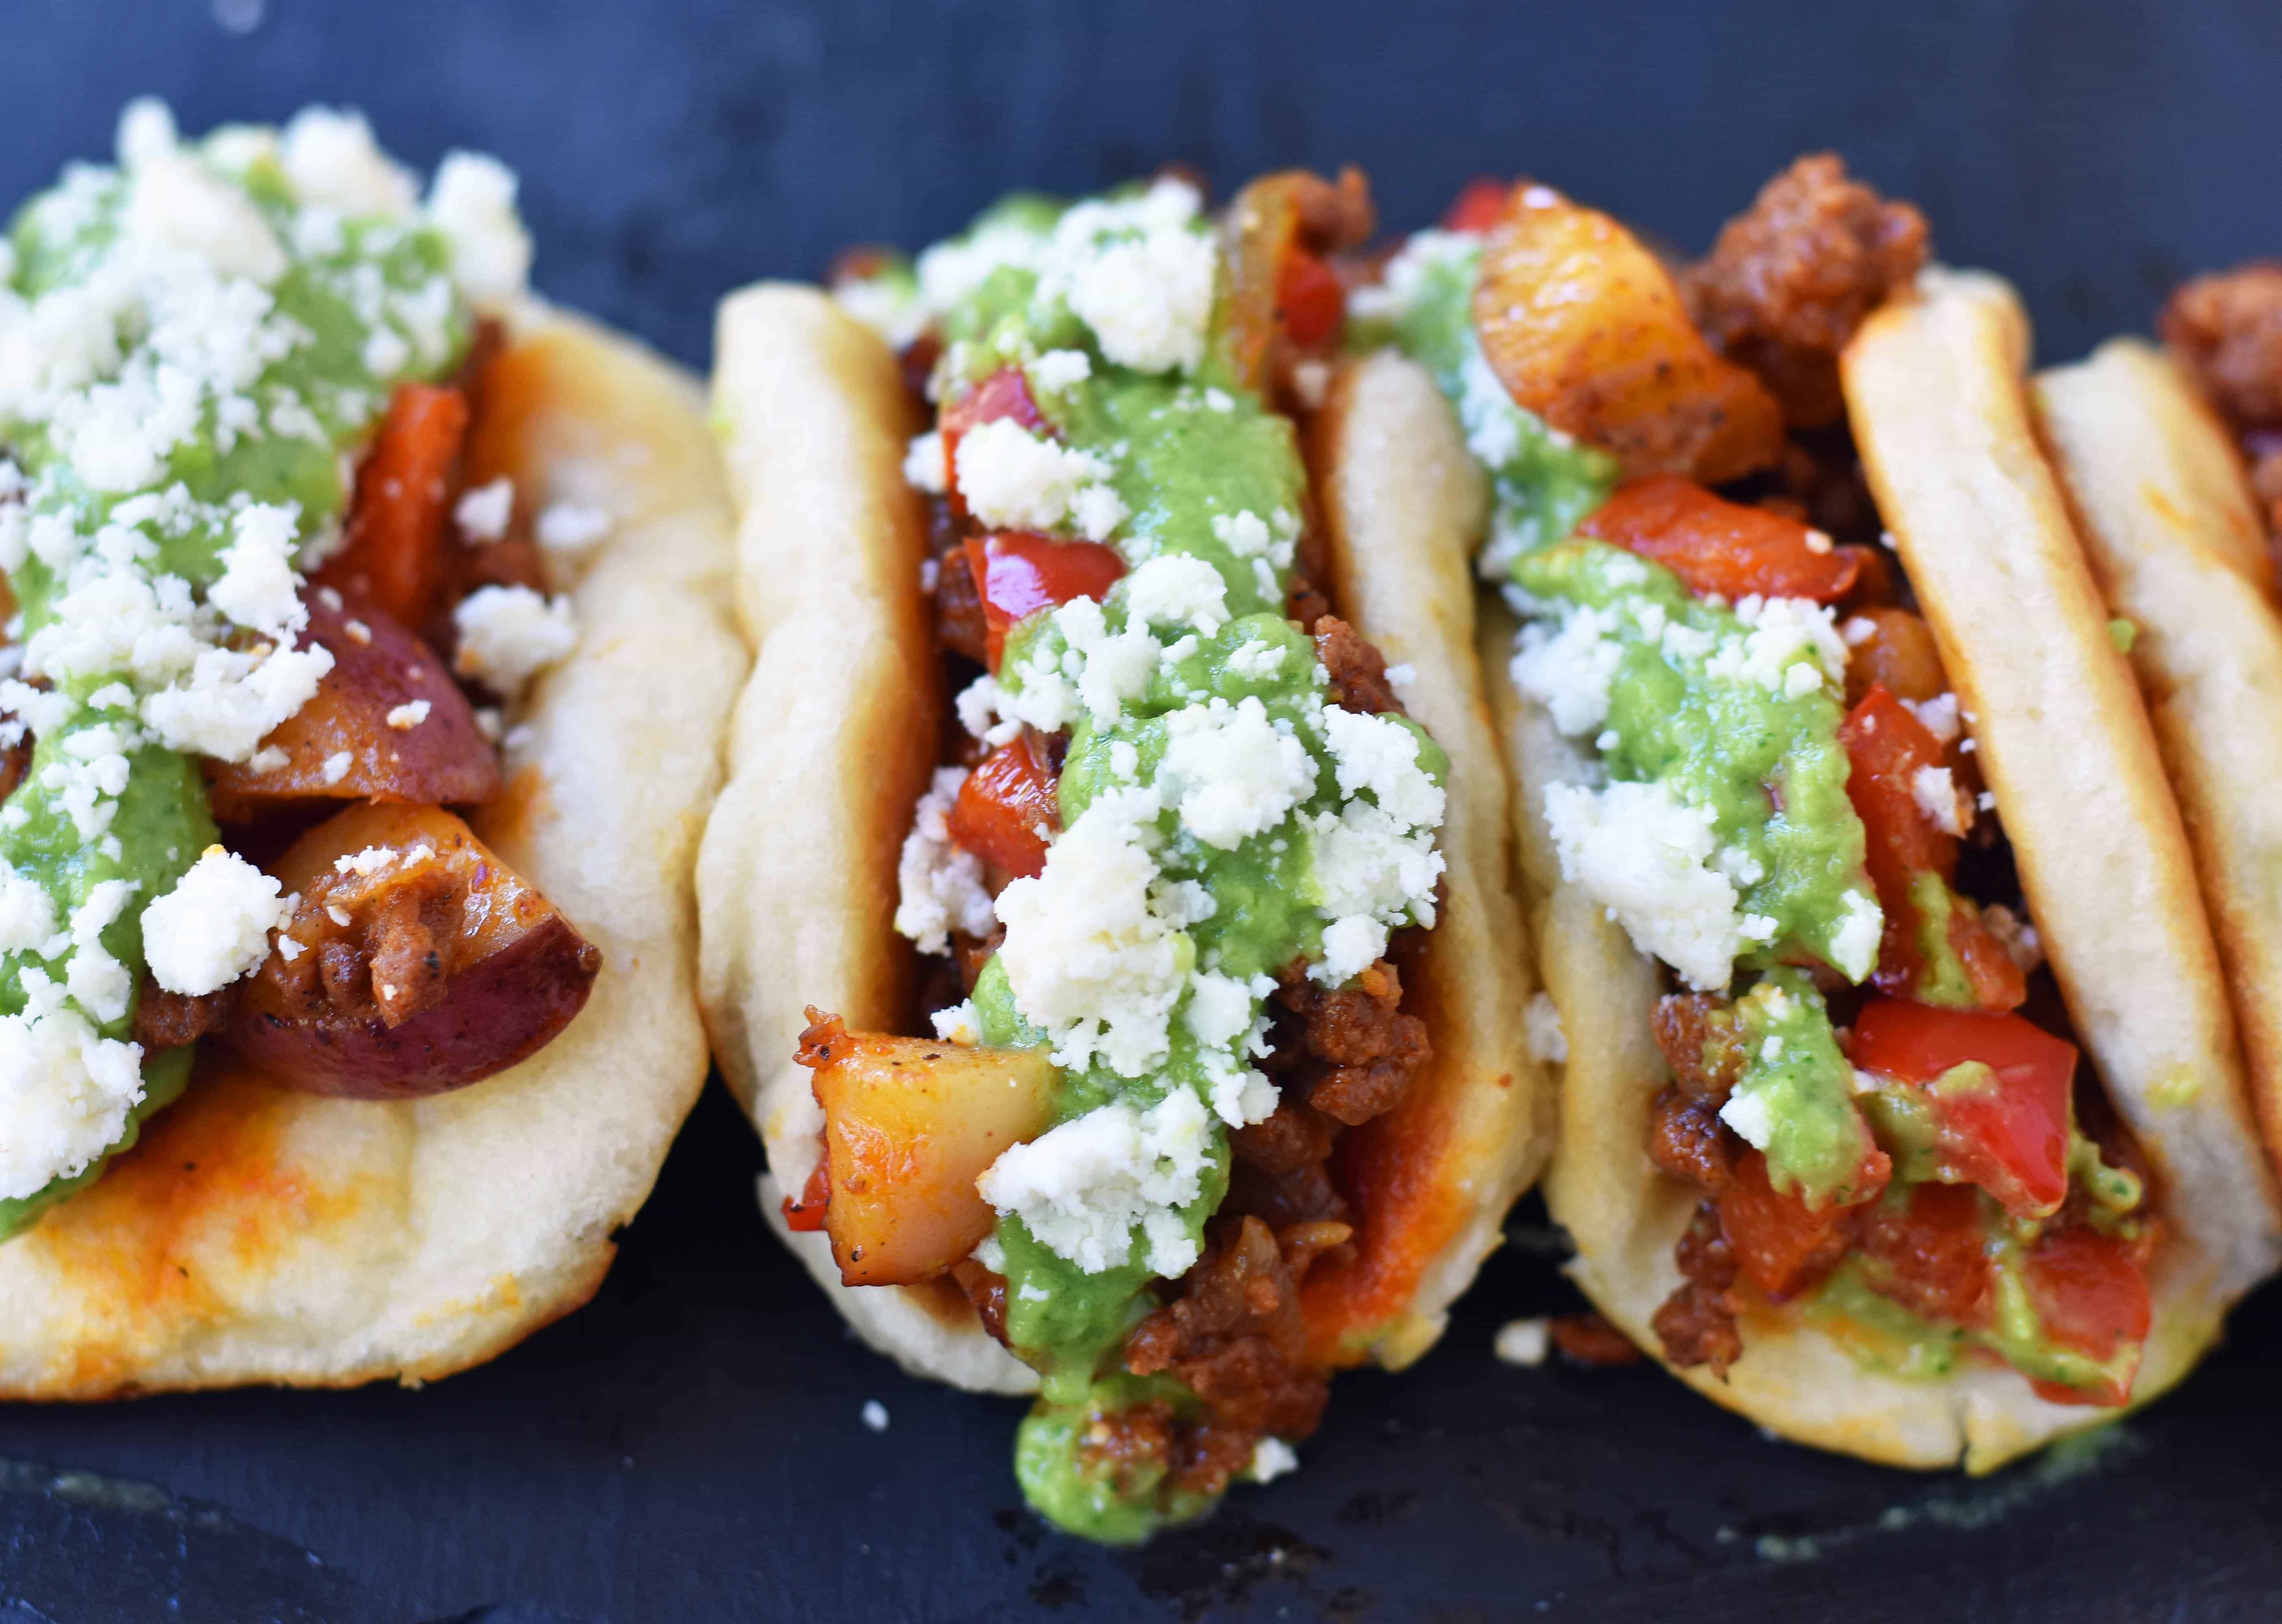 Chorizo Potato Puffy Tacos from Melissa Stadler 46th Pillsbury Bake-Off Contest. Puffy Tacos made with Pillsbury biscuit dough and filled with spicy chorizo, seasoned potatoes and peppers, a creamy avocado tomatillo crema, and cotija cheese. www.modernhoney.com